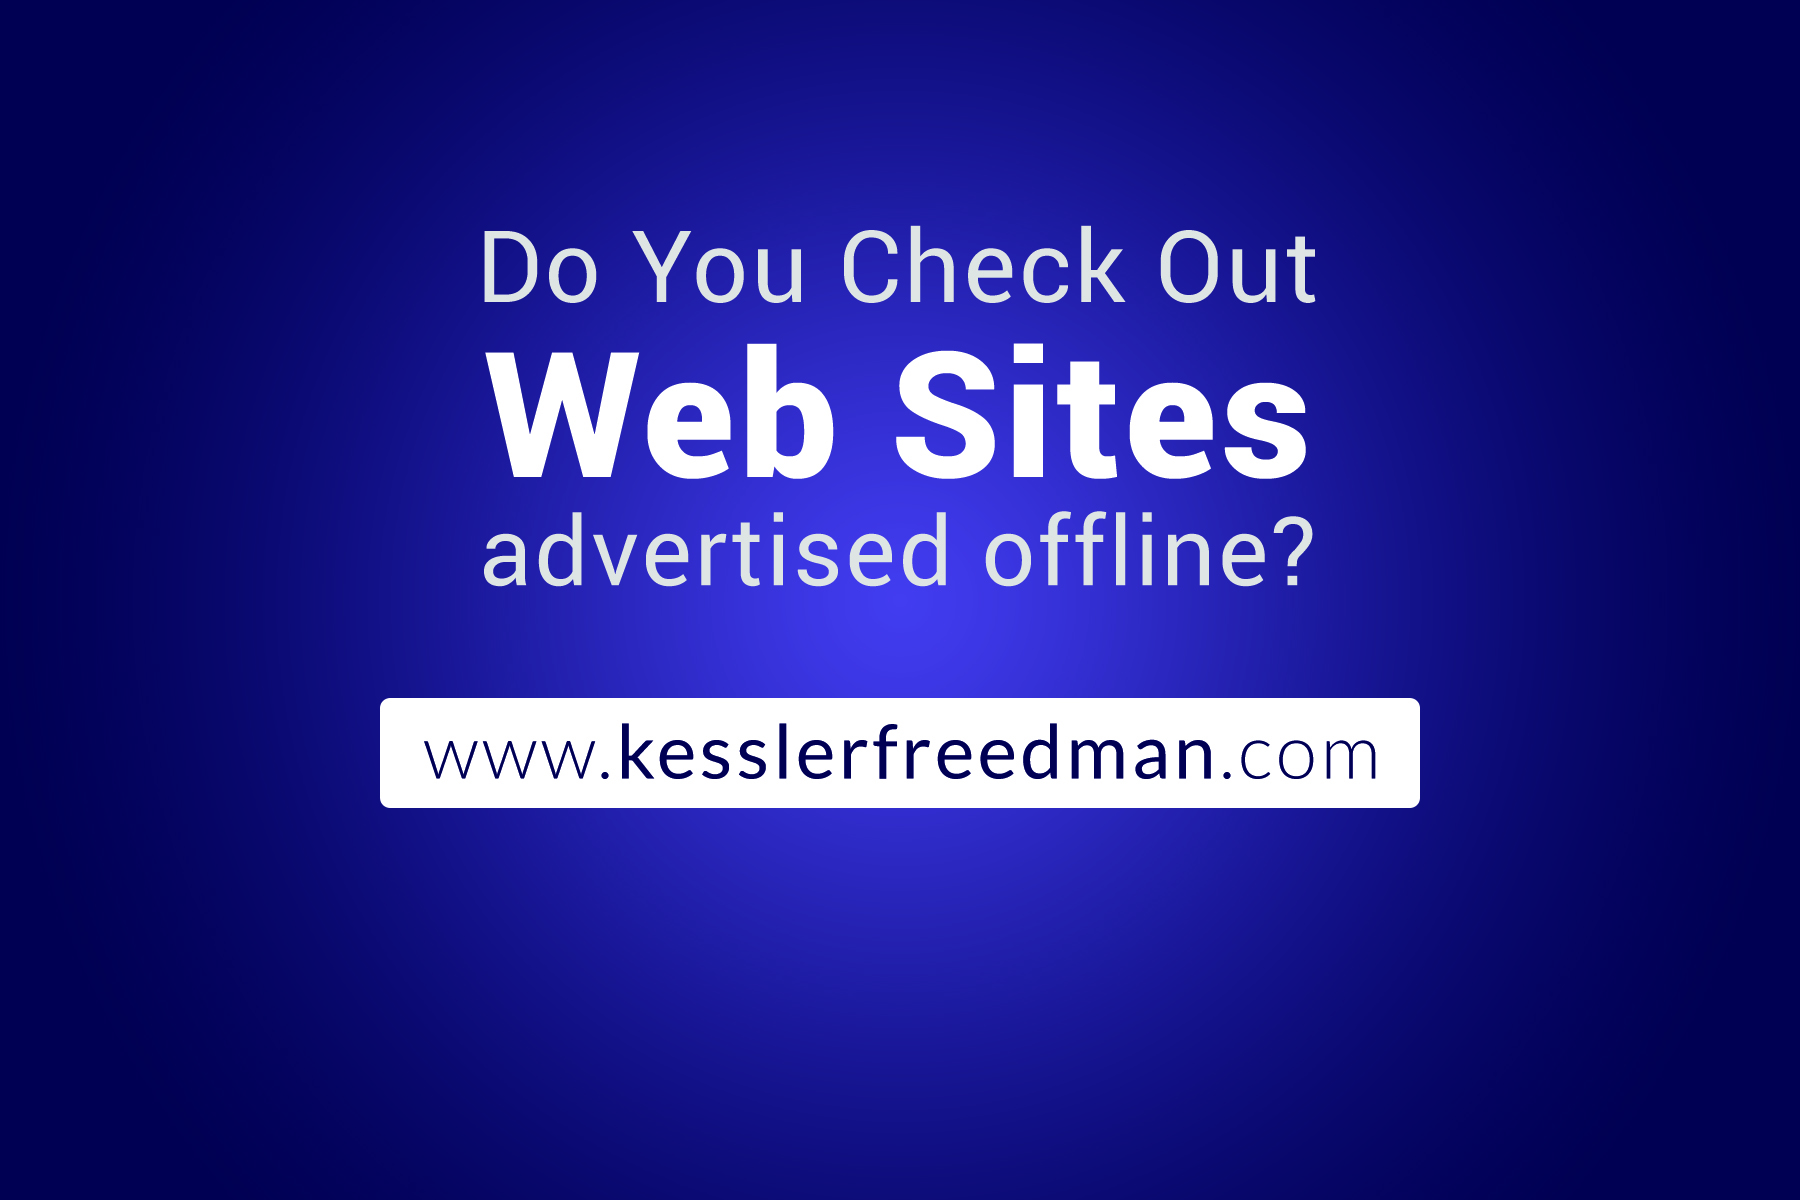 Do You Check Out Web Sites Advertised Offline?